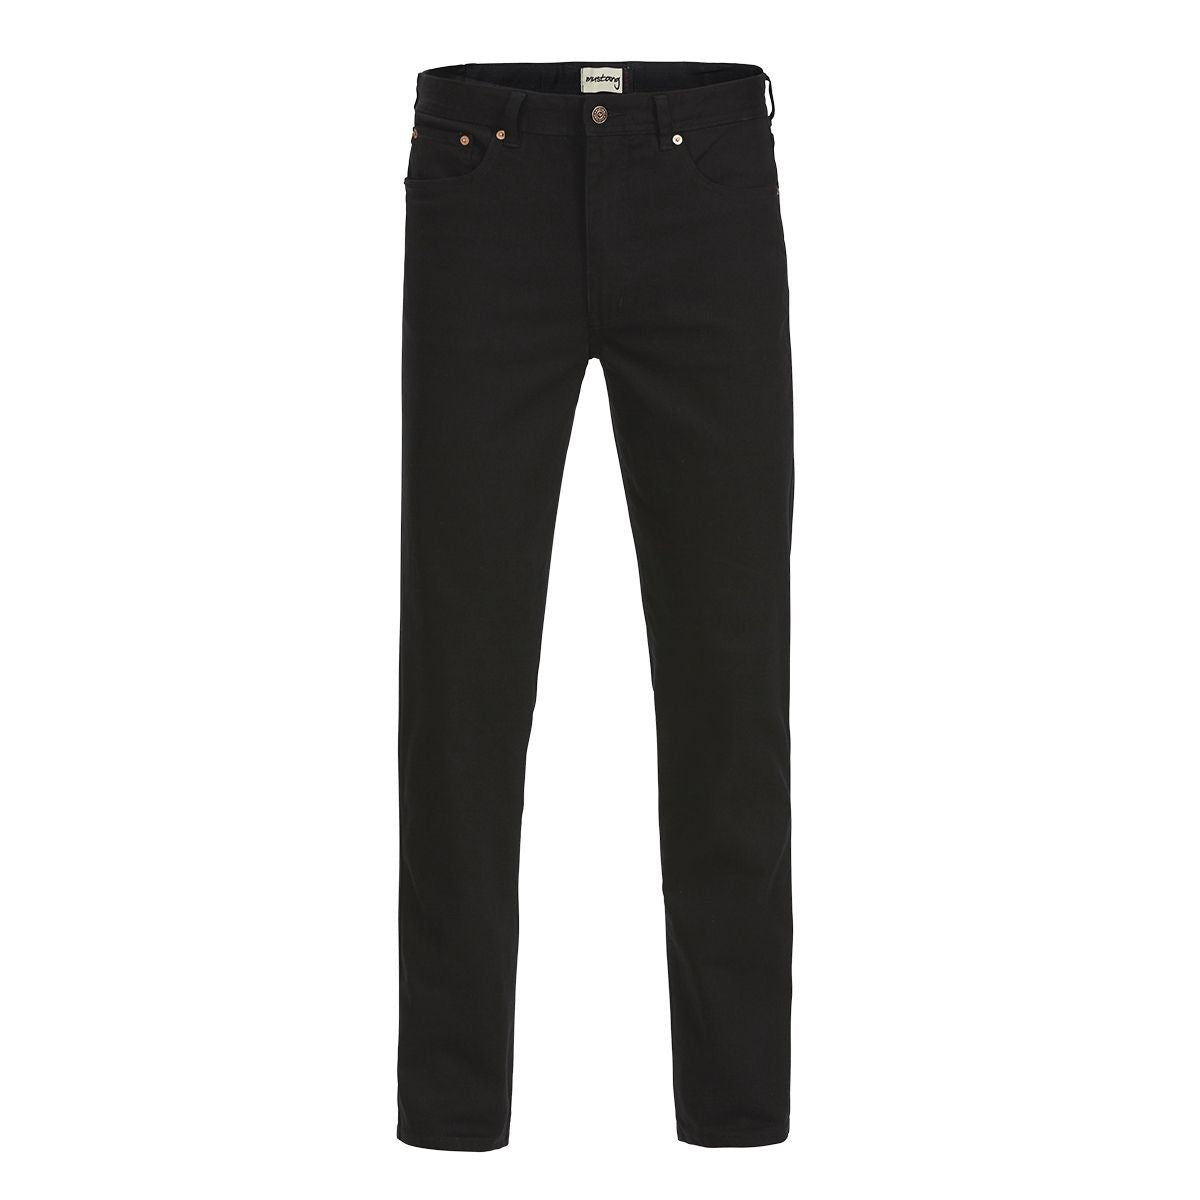 Mustang Stretch Jeans in Black